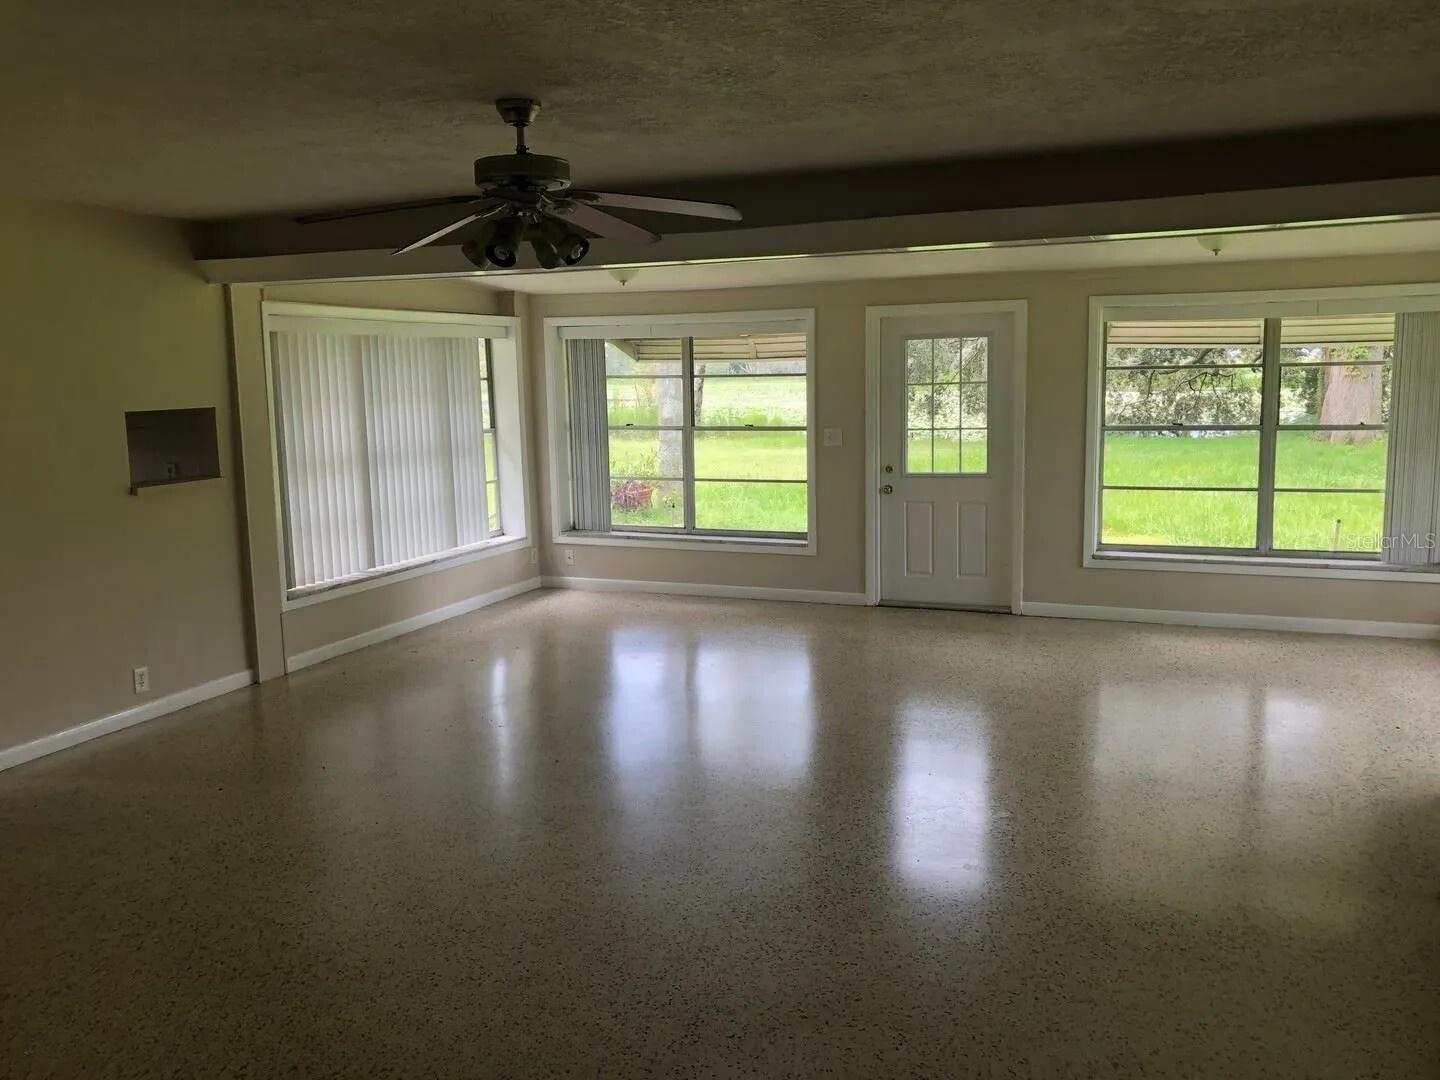 Additional Home Living Room